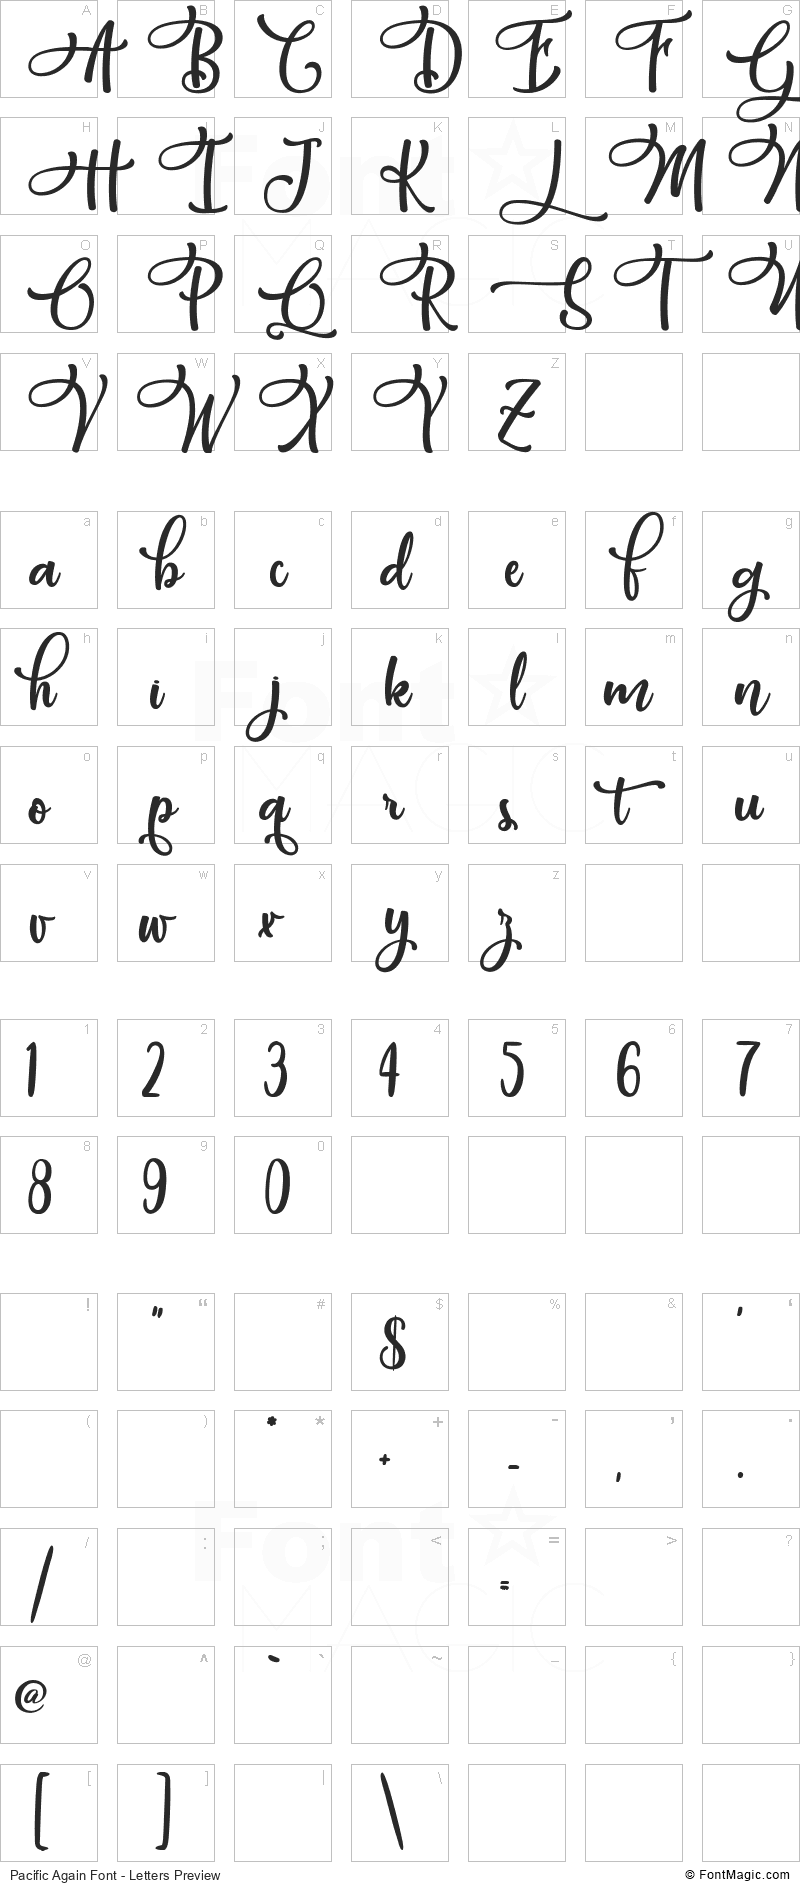 Pacific Again Font - All Latters Preview Chart